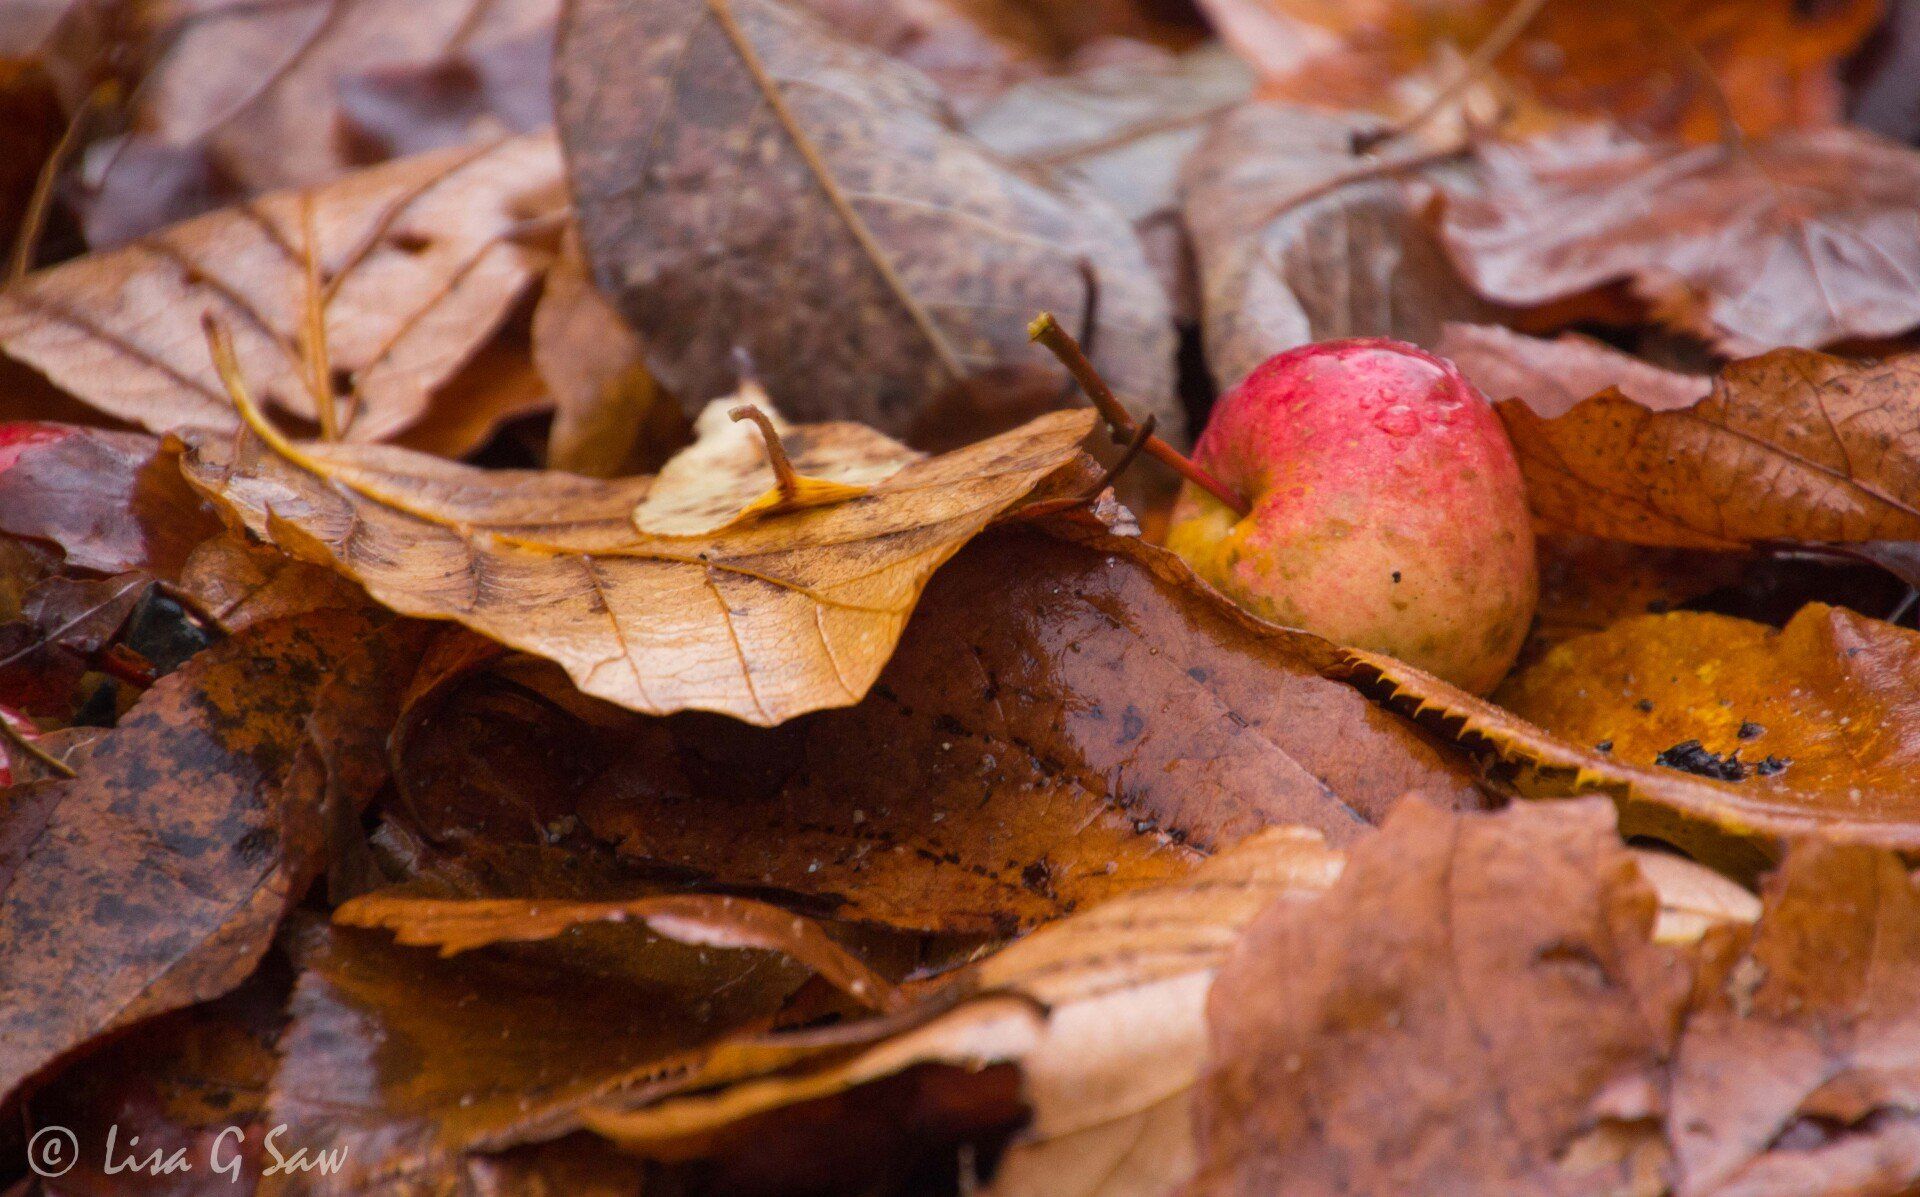 Fall apple amongst the leaf litter in autumn